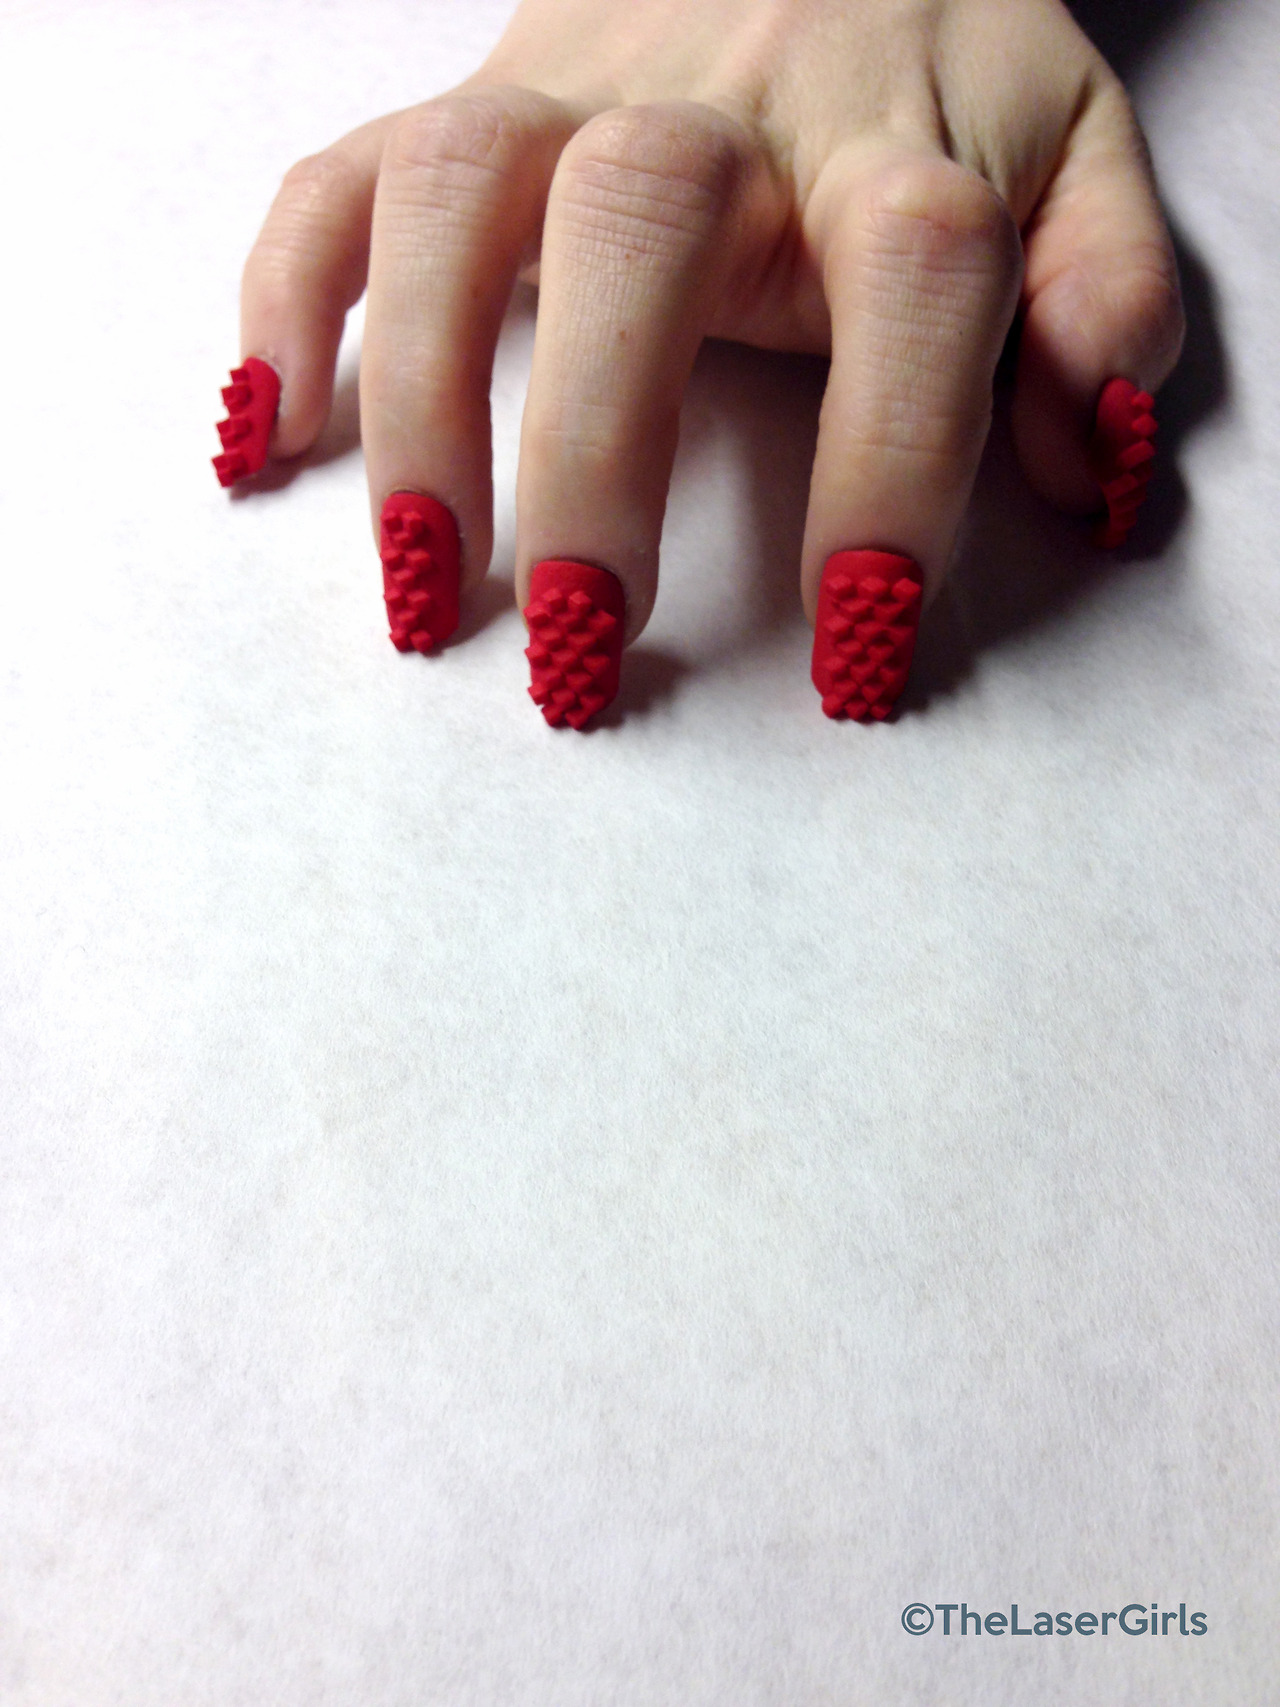 3D-Printed Nails Are Way Crazier Than Your Typical Press-Ons